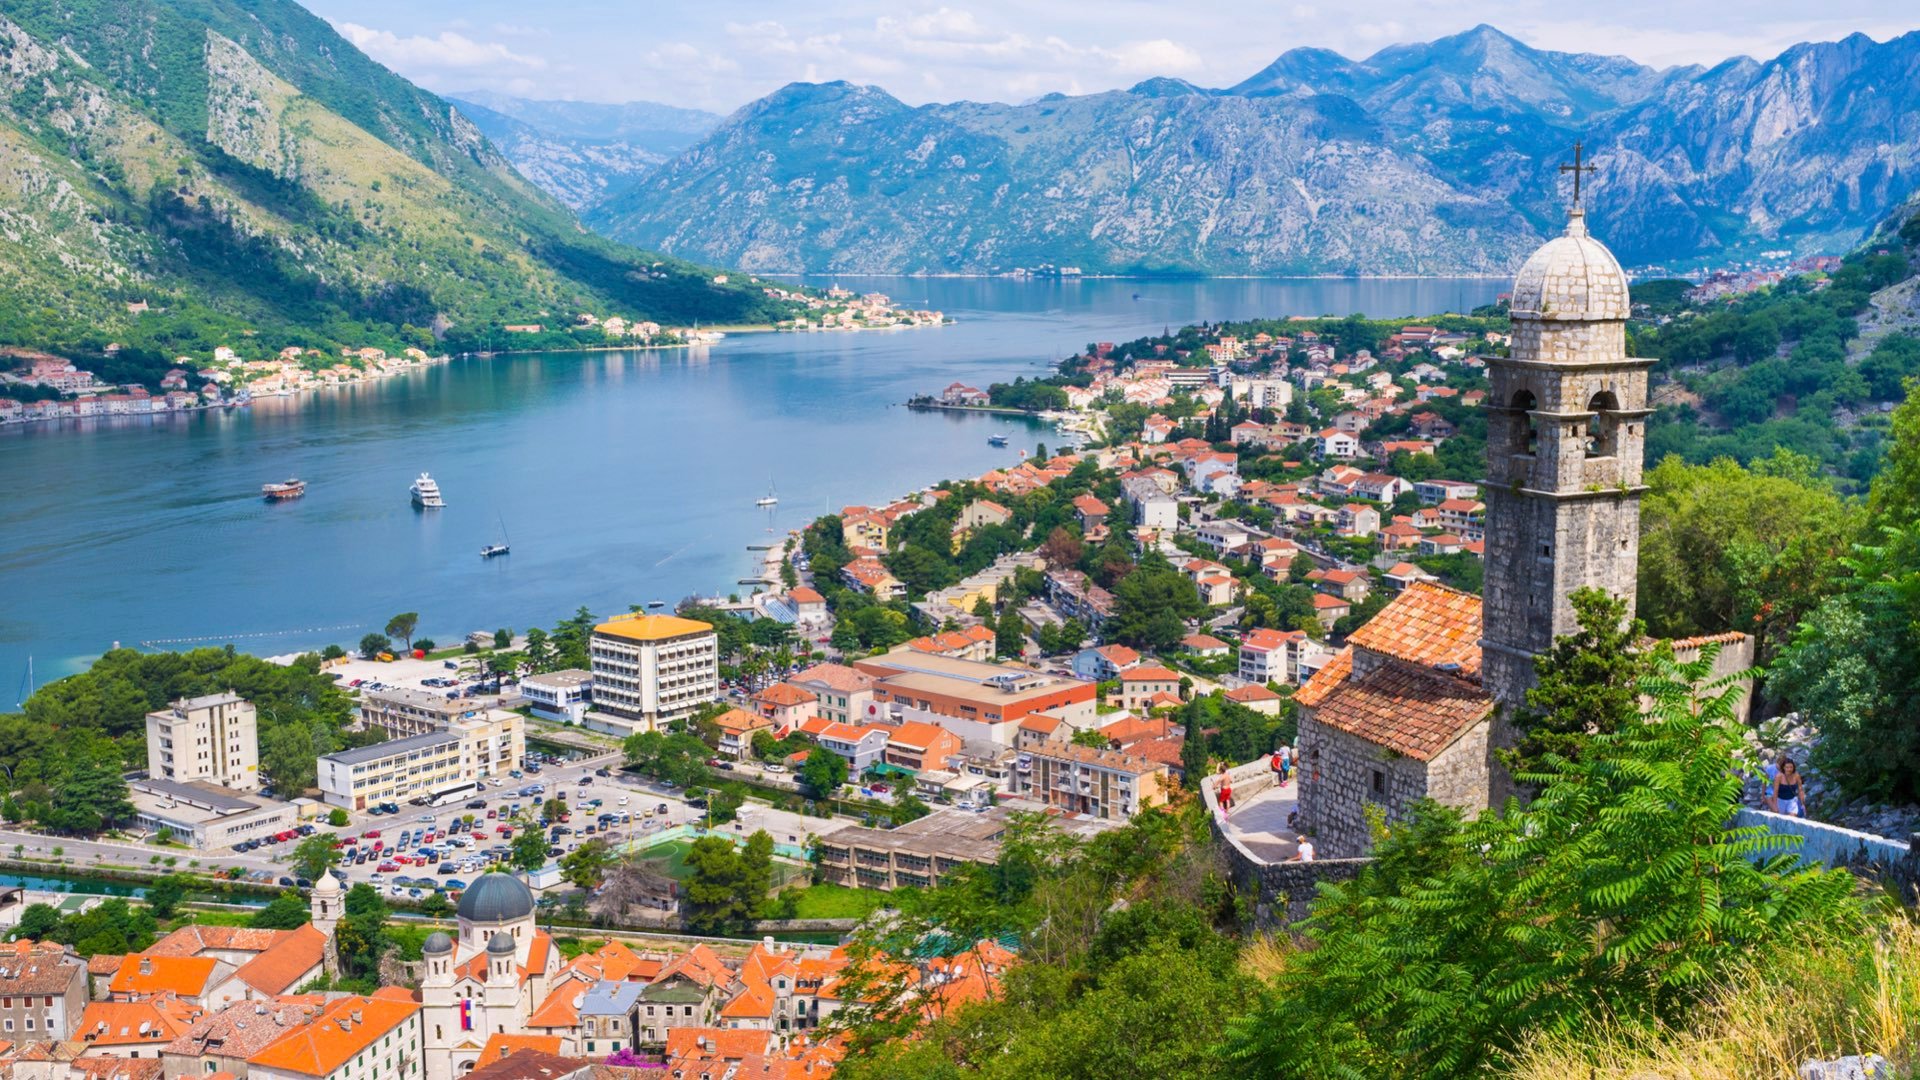 <p>Montenegro is a hidden gem in southeastern Europe, offering an appealing Mediterranean ambiance among its one million inhabitants. This quiet Balkan nation is perfect for those who want an affordable lifestyle and beautiful weather. Its 183 miles of coastline boasts over 100 beaches. Rental prices are<a href="https://www.numbeo.com/cost-of-living/compare_countries_result.jsp?country1=Montenegro&country2=United+States"> less than half</a> of the US, and most consumer goods are considerably cheaper.</p>